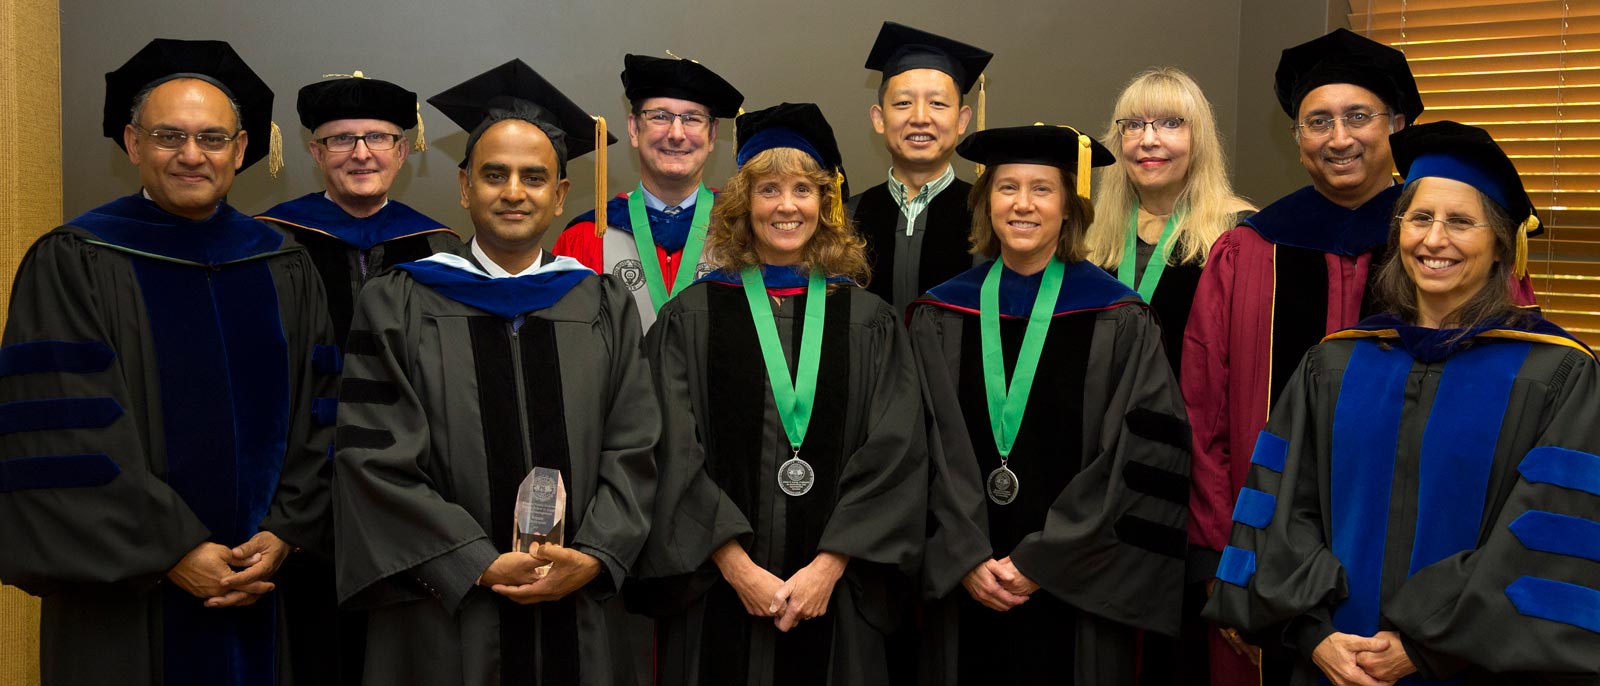 Group photo from Broad faculty investiture ceremony held at the Kellogg Center.